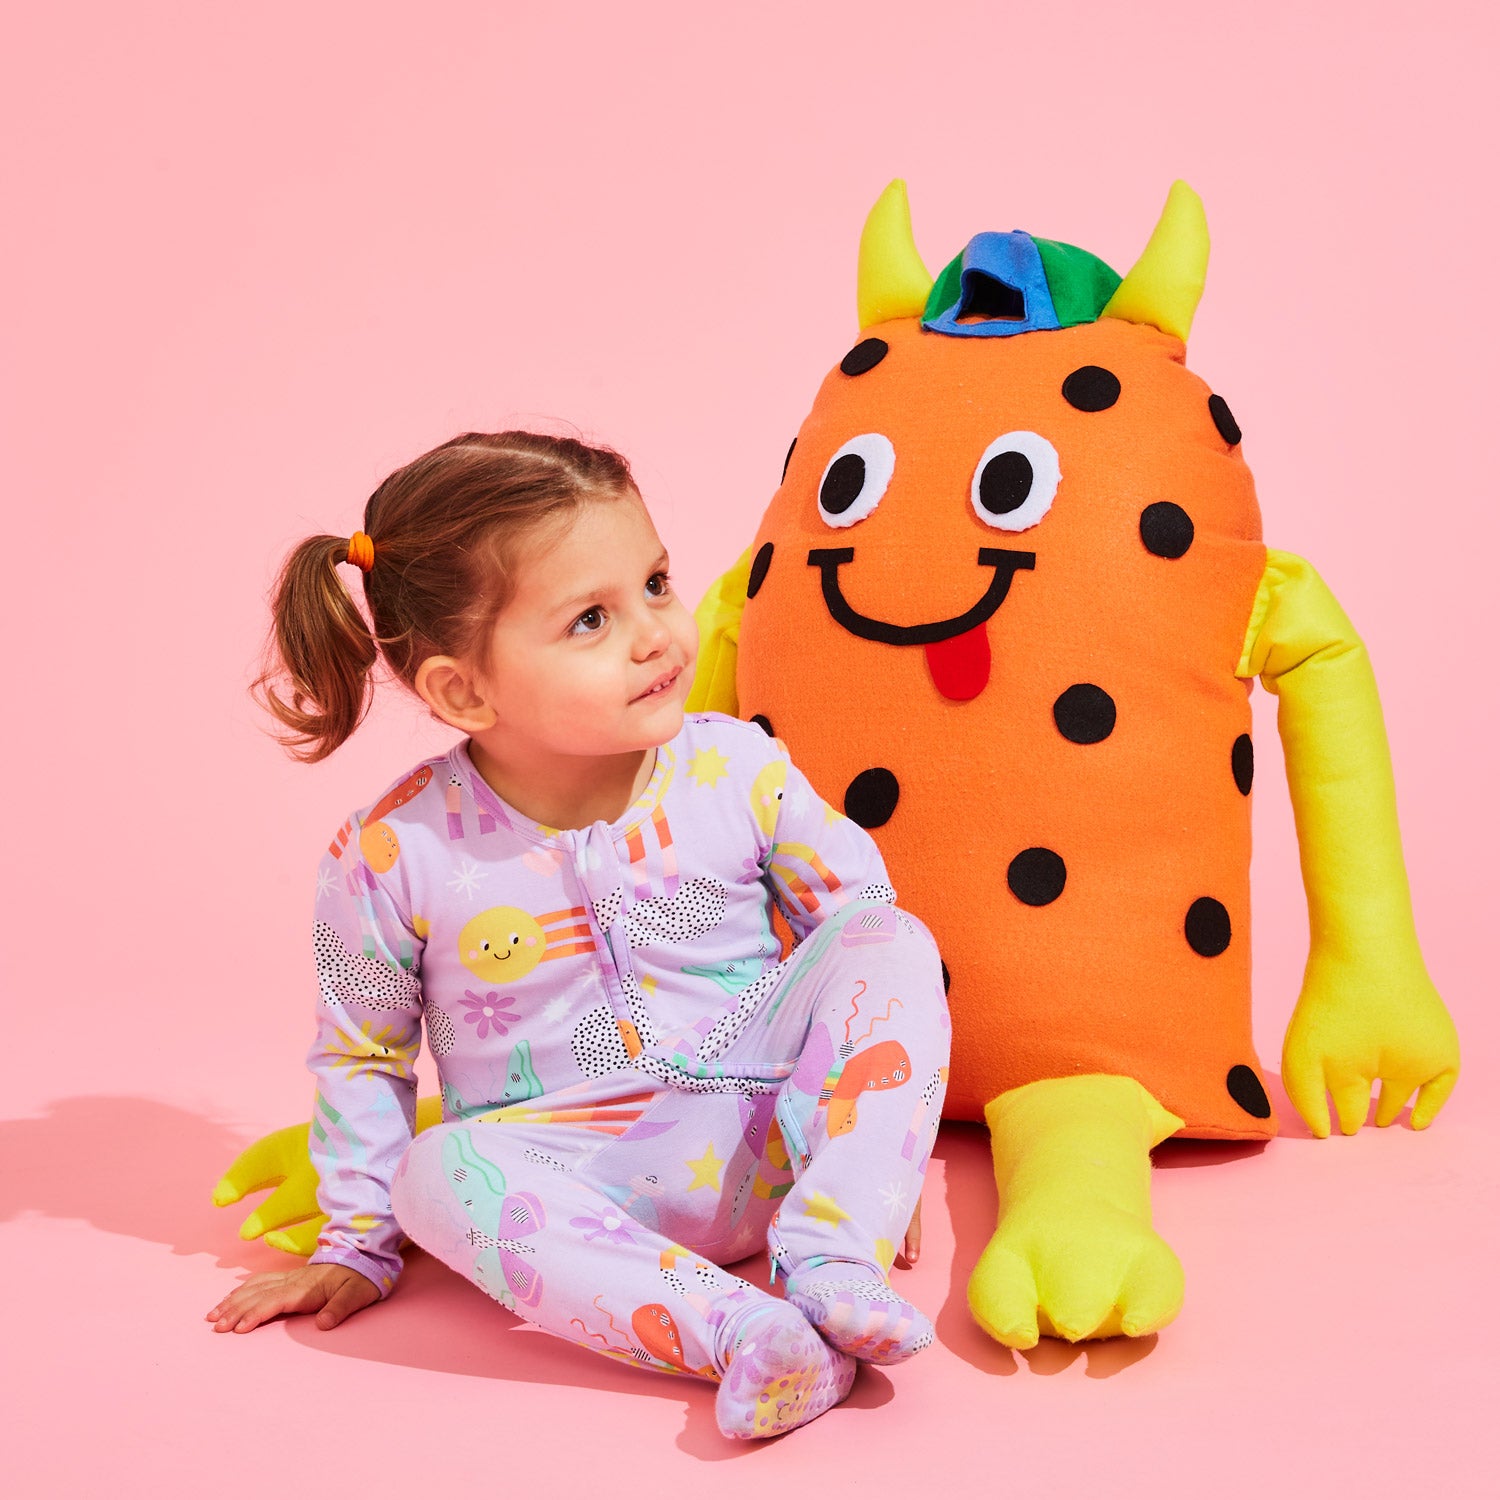 Children in patterned pyjamas play in a colourful background with custom Kitiya Palaskas cardboard props that include a sun, cactus, rainbow, clouds and butterfly